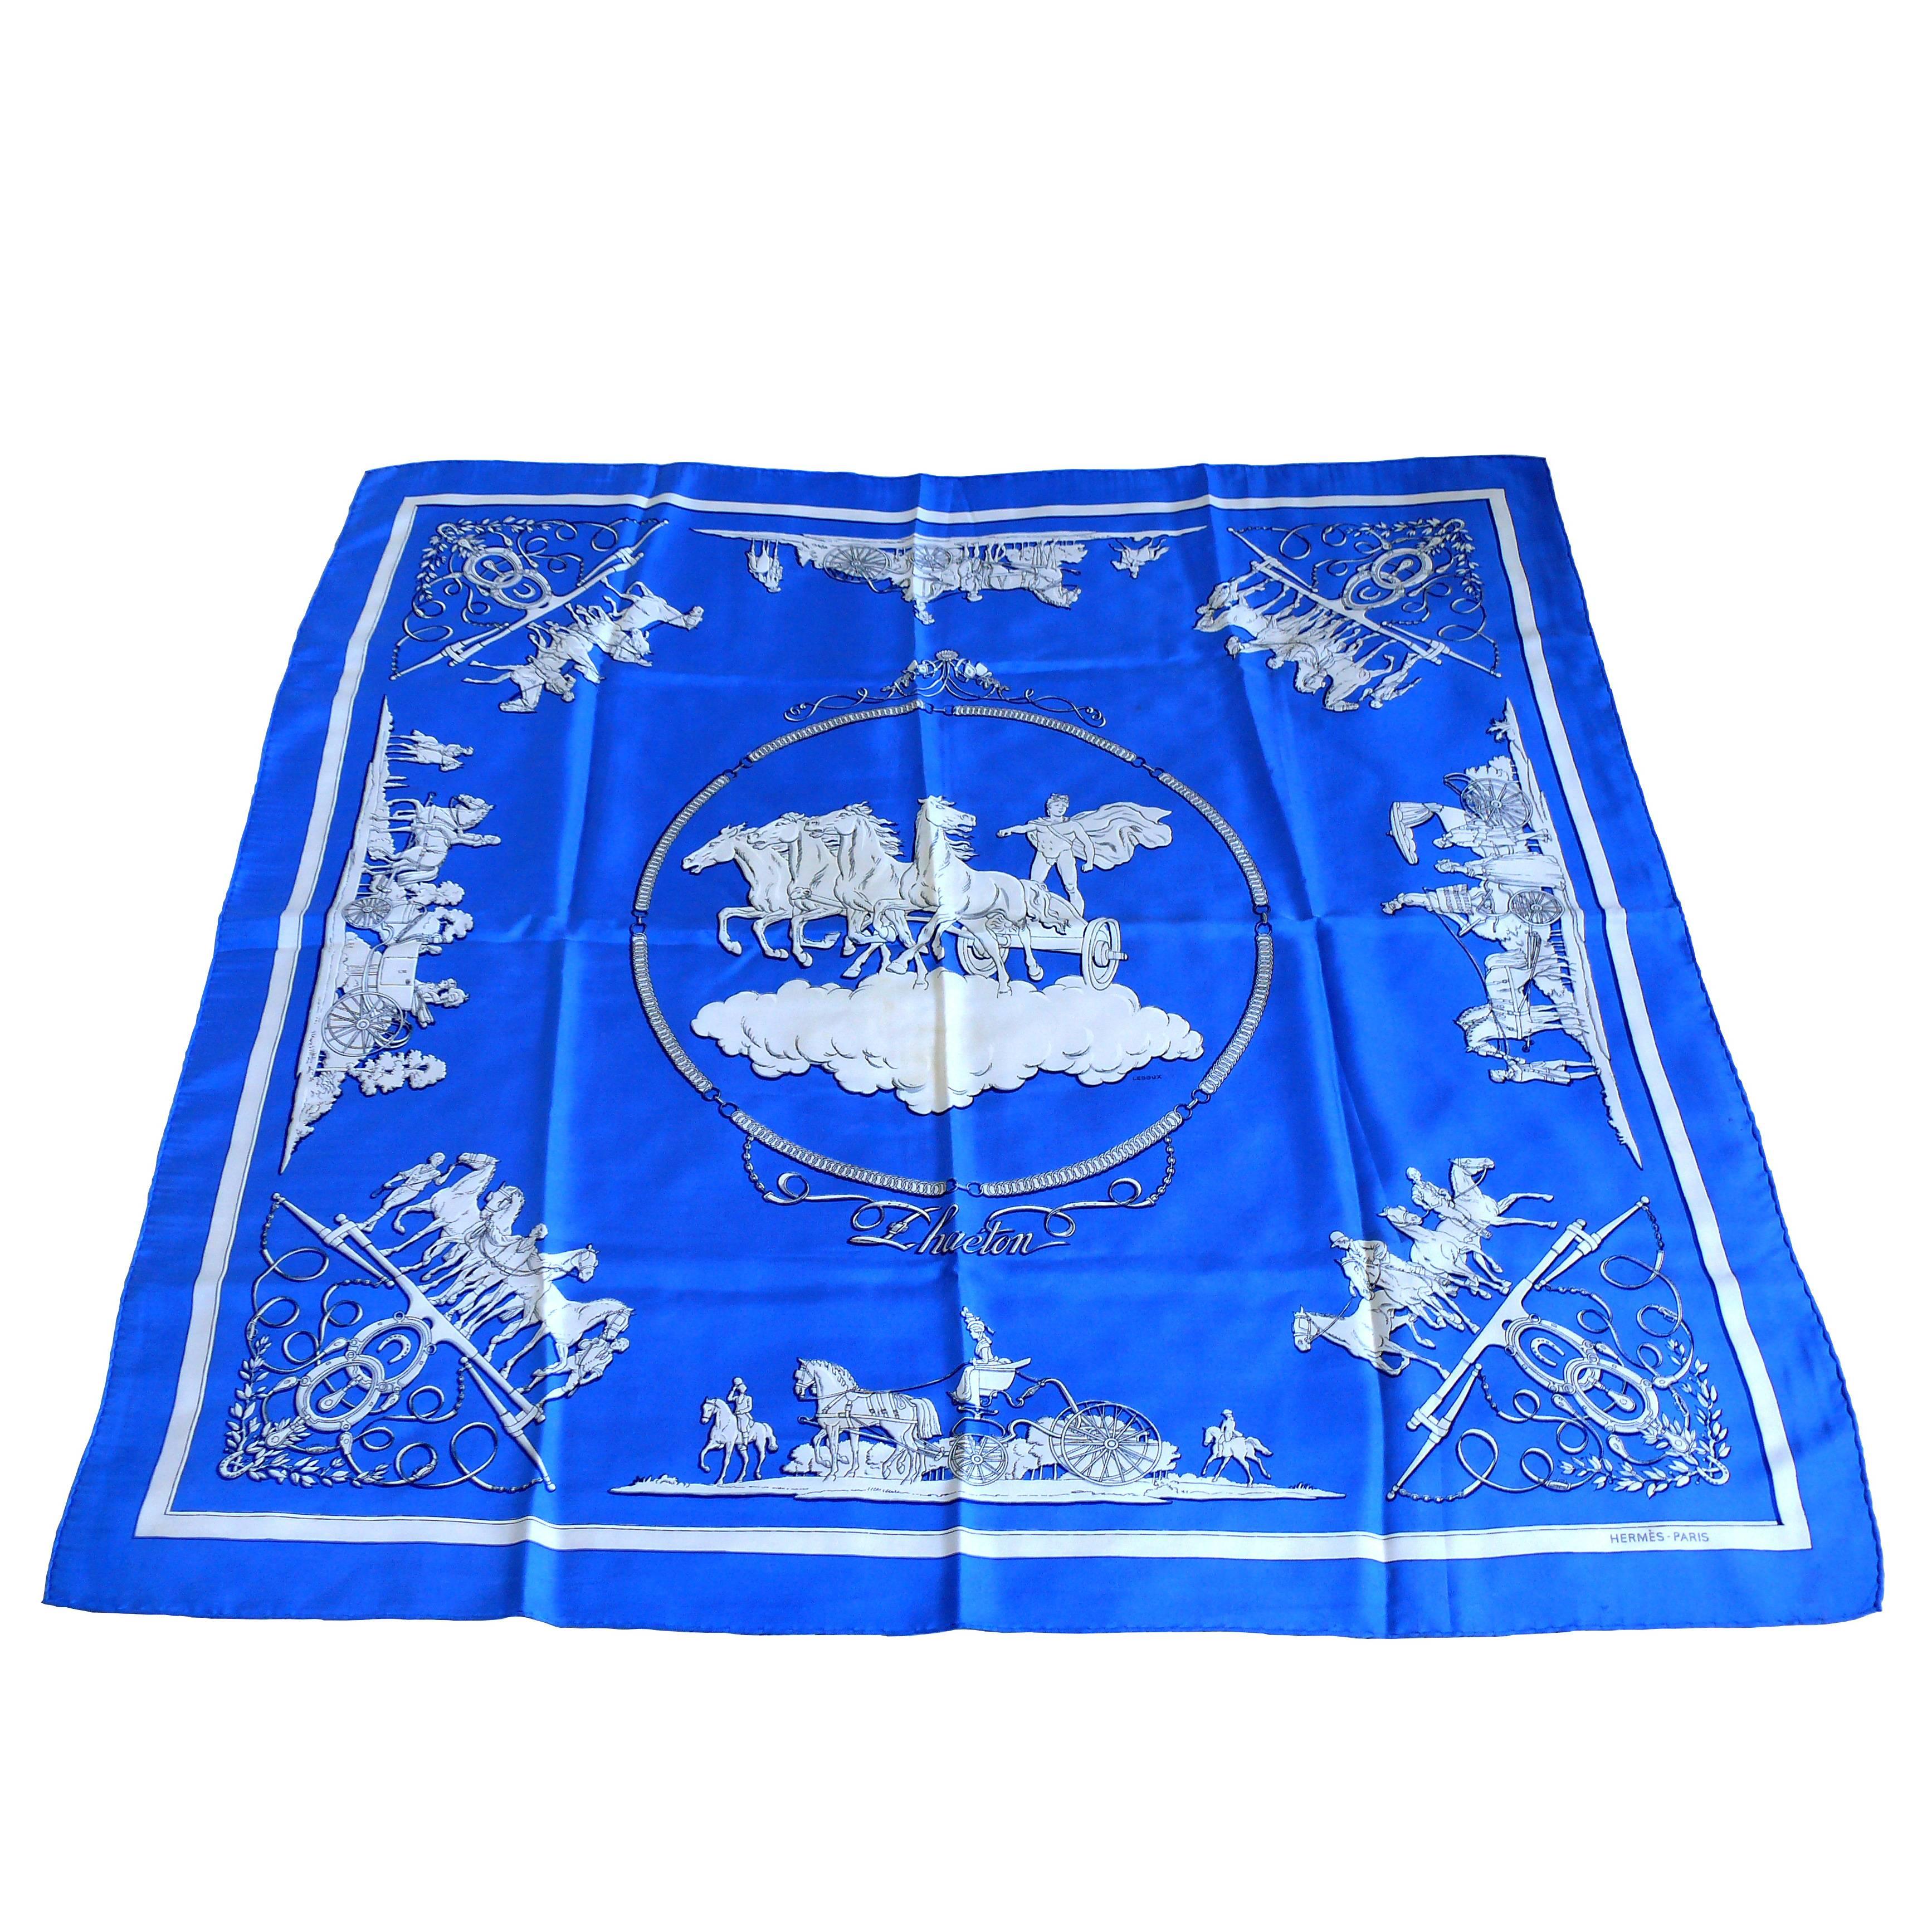 Hermes Collectable Rare Vintage Silk Scarf Carre "Phaeton" by Ledoux